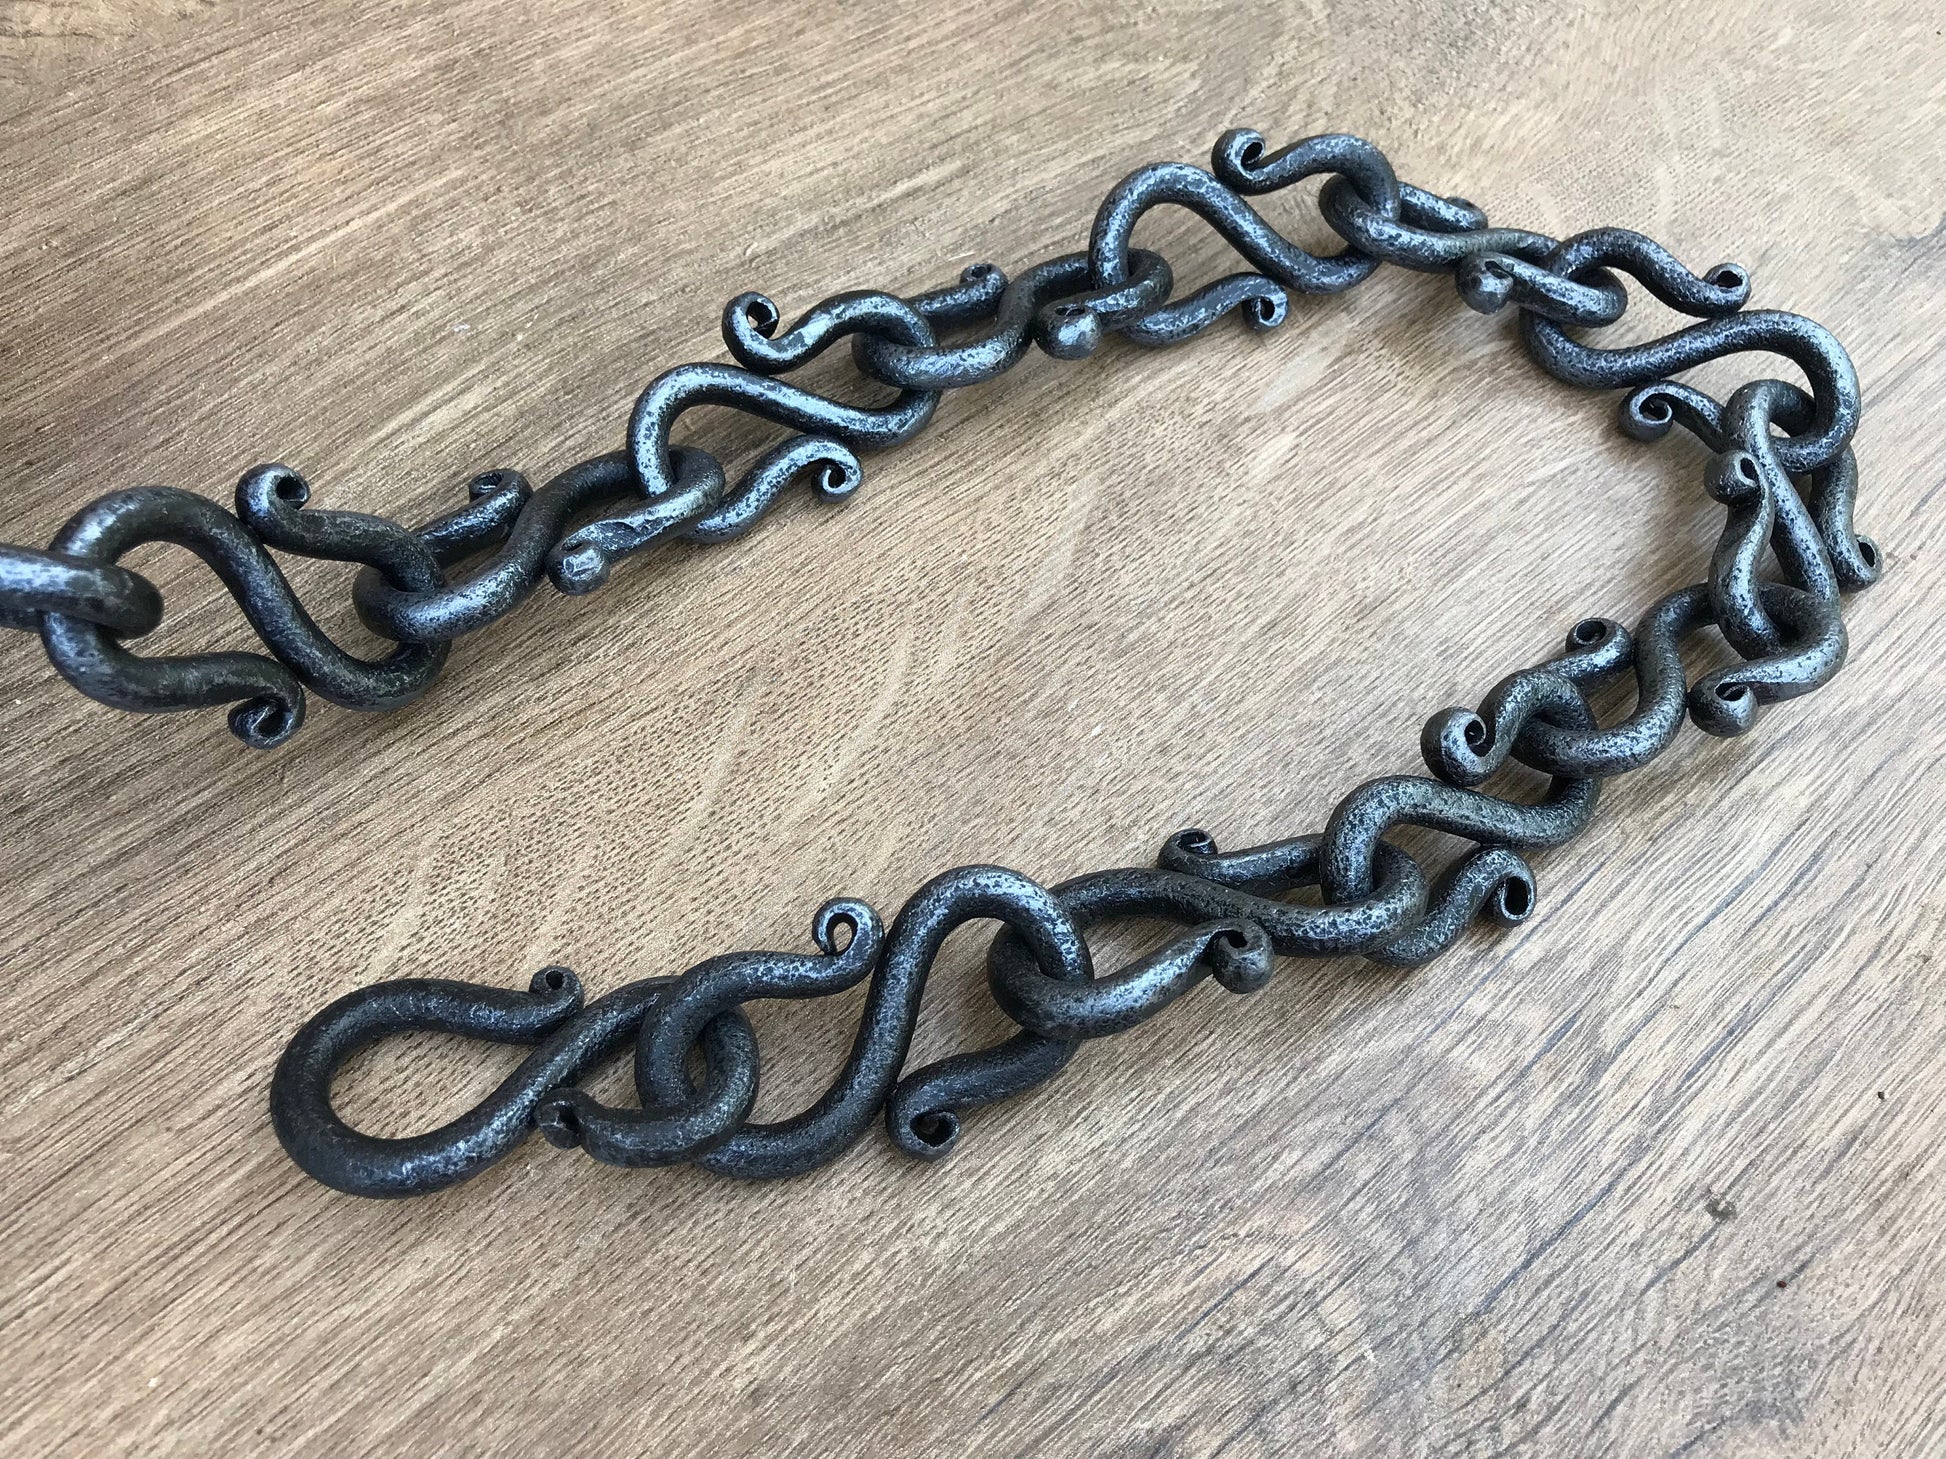 On Sale 61'' Long Hand Forged Chain Antique Metal Chain Vintage Iron Chain,  Antique Chain, Chain for Lamps, Industrial decor FREE DELIVERY